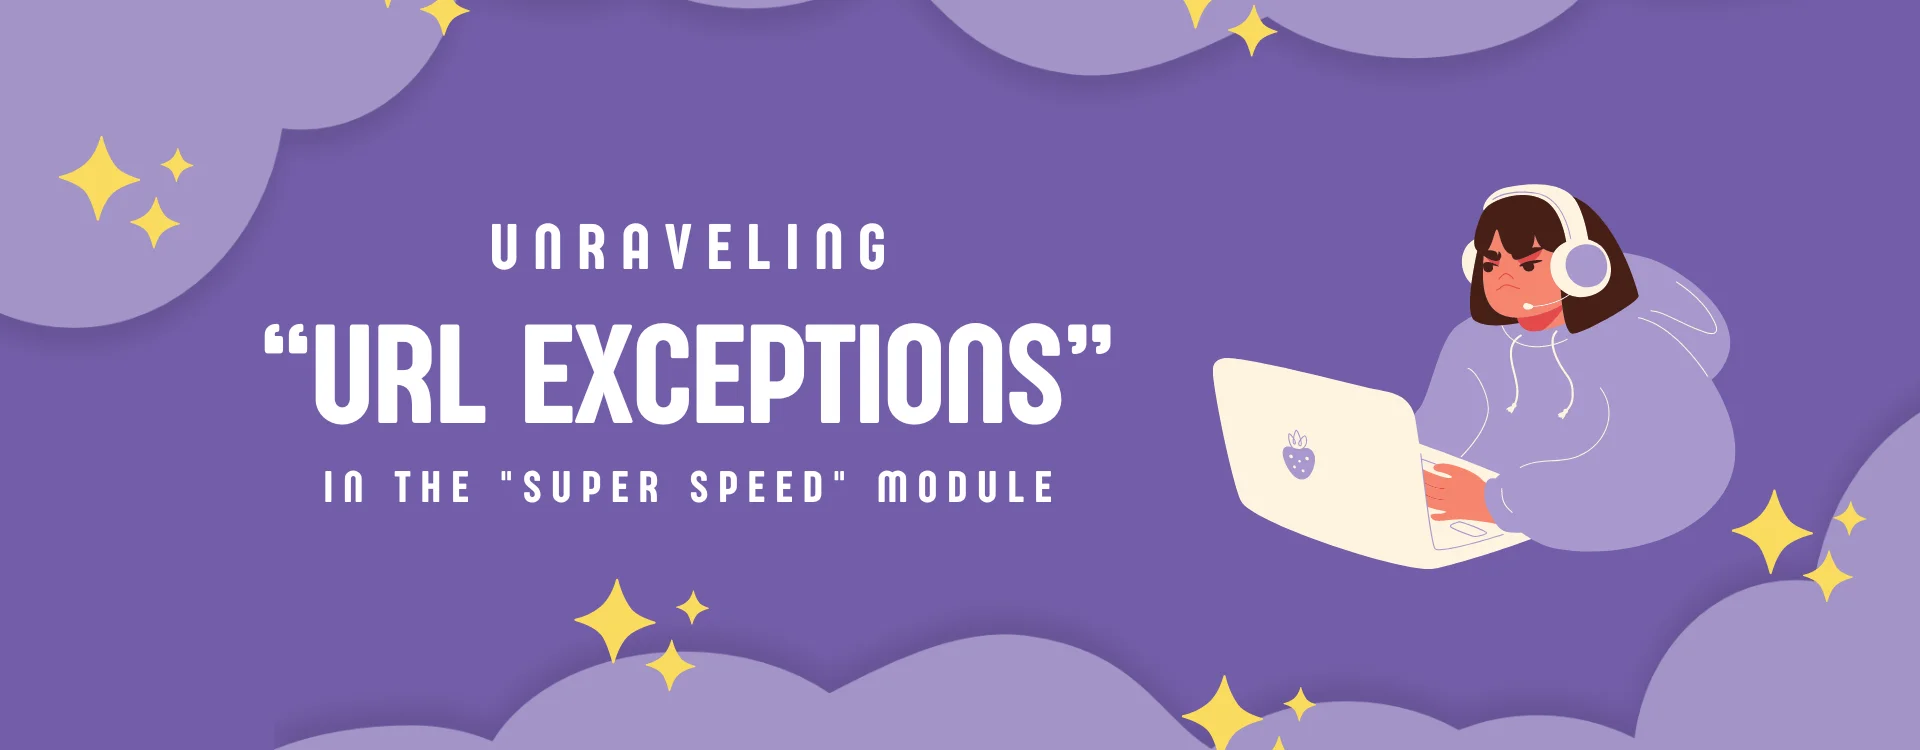 Unraveling “URL Exceptions” in the "Super Speed" Module - A Comprehensive Guide